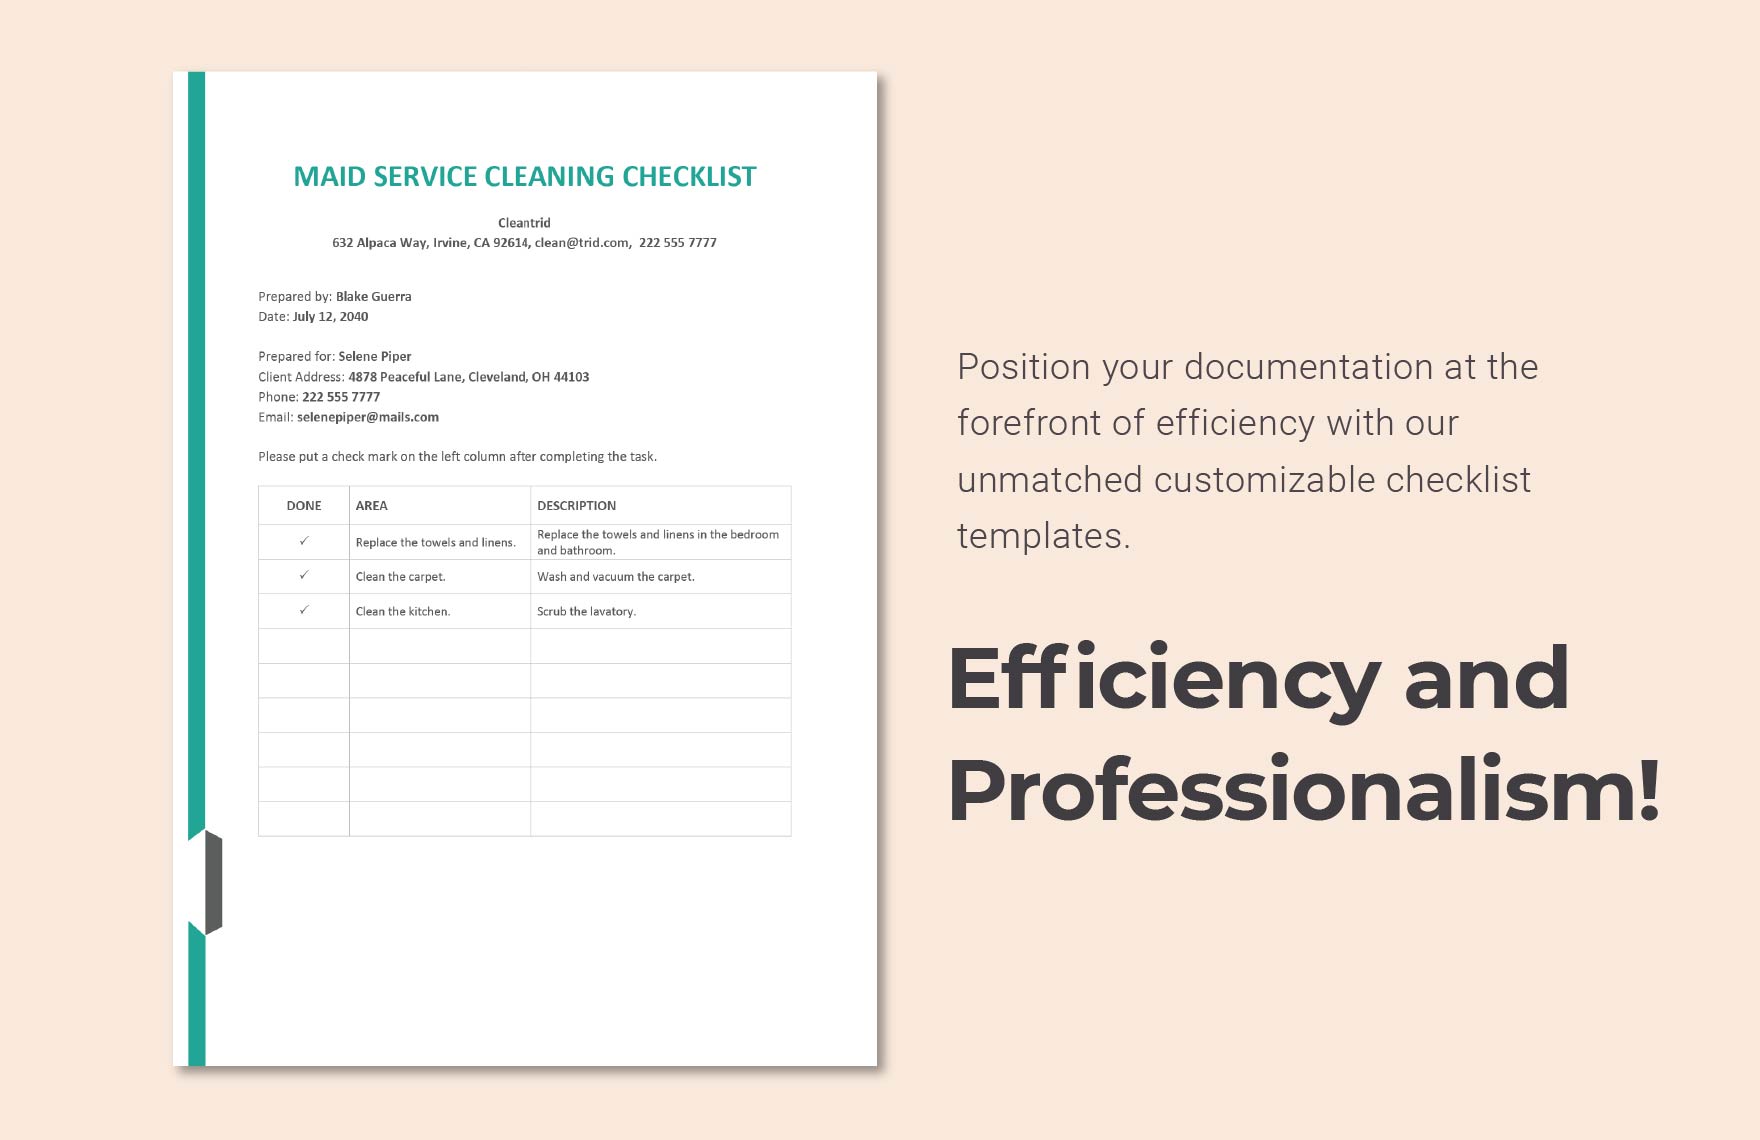 Maid Service Cleaning Checklist Template